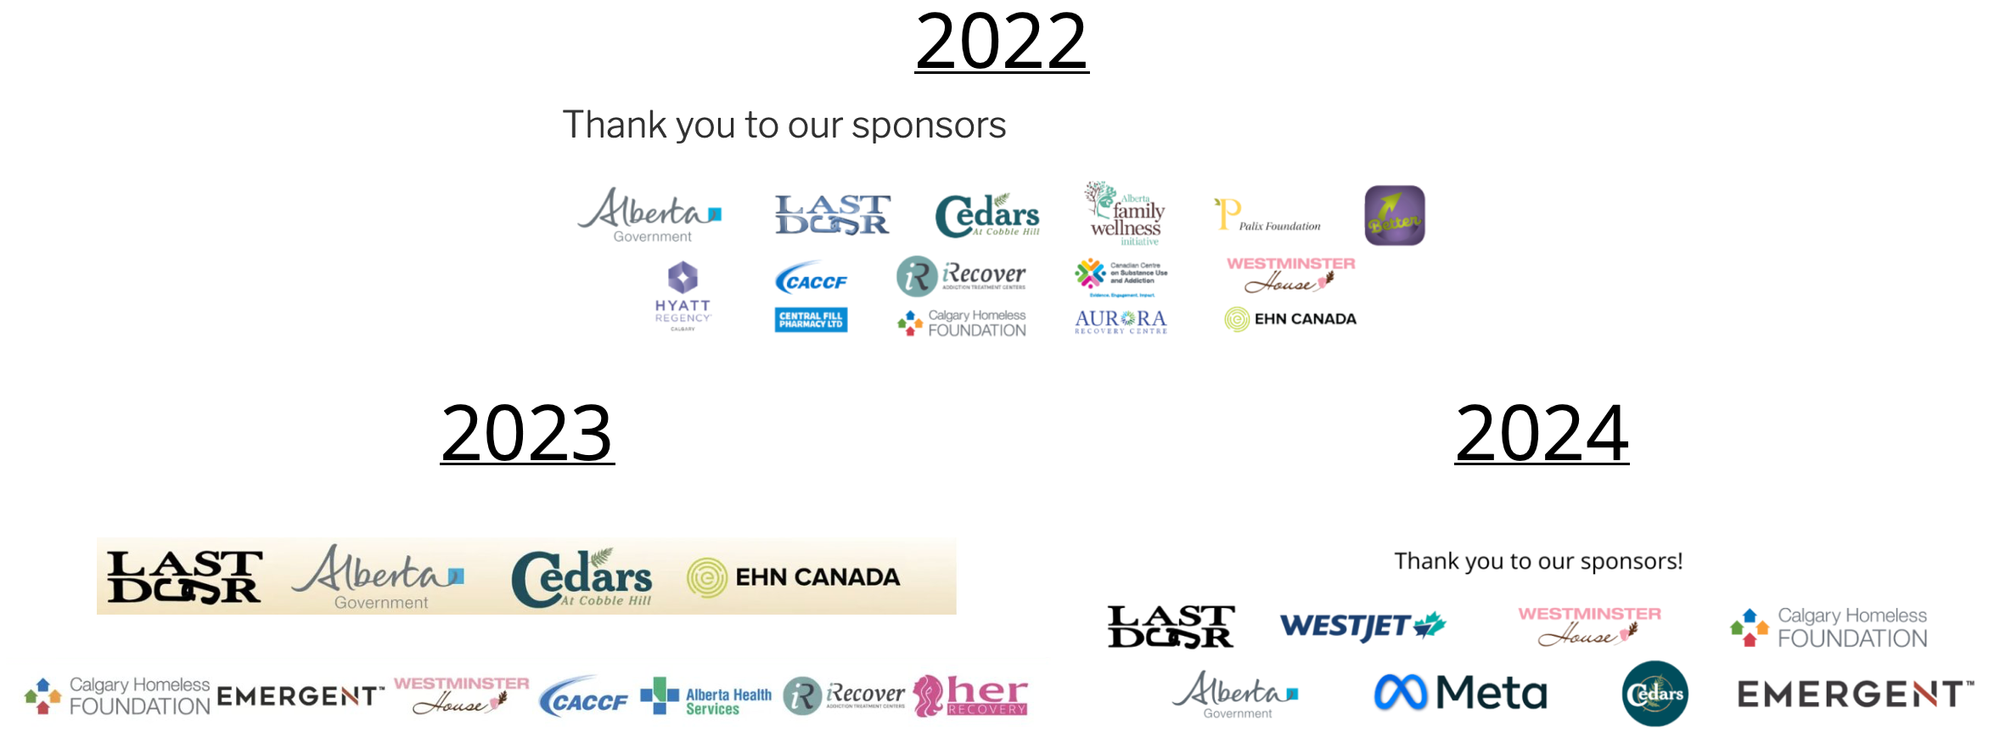 sponsors of Recovery Capital Conferences held in Calgary between 2022 and 2024. Figure caption has the key information.